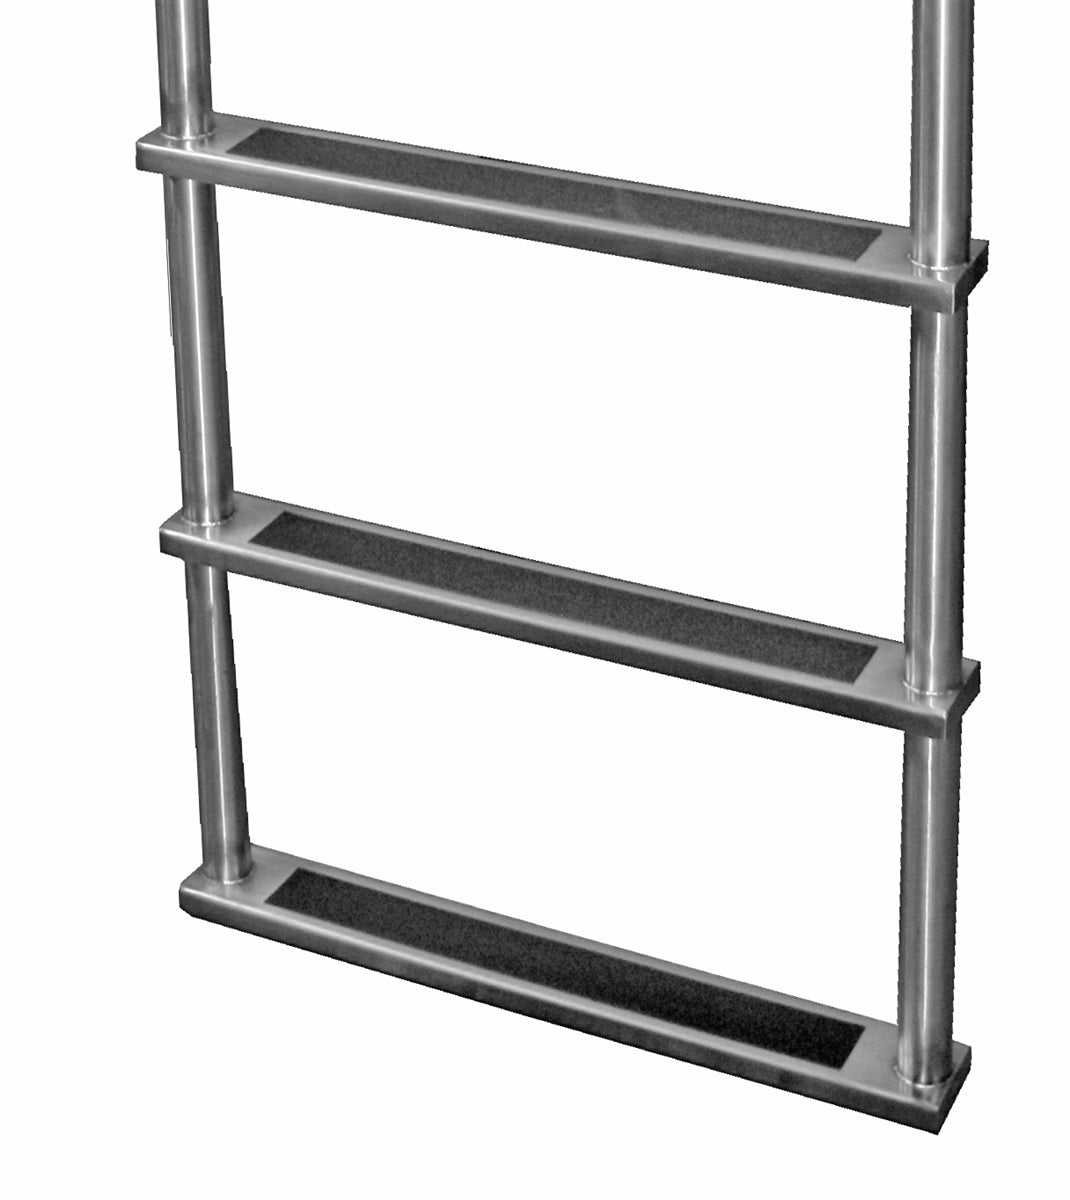 L-1200-LB Three-Step Stainless Steel Dock Ladder, Front Mount, Welded Flanges - 6" Handles